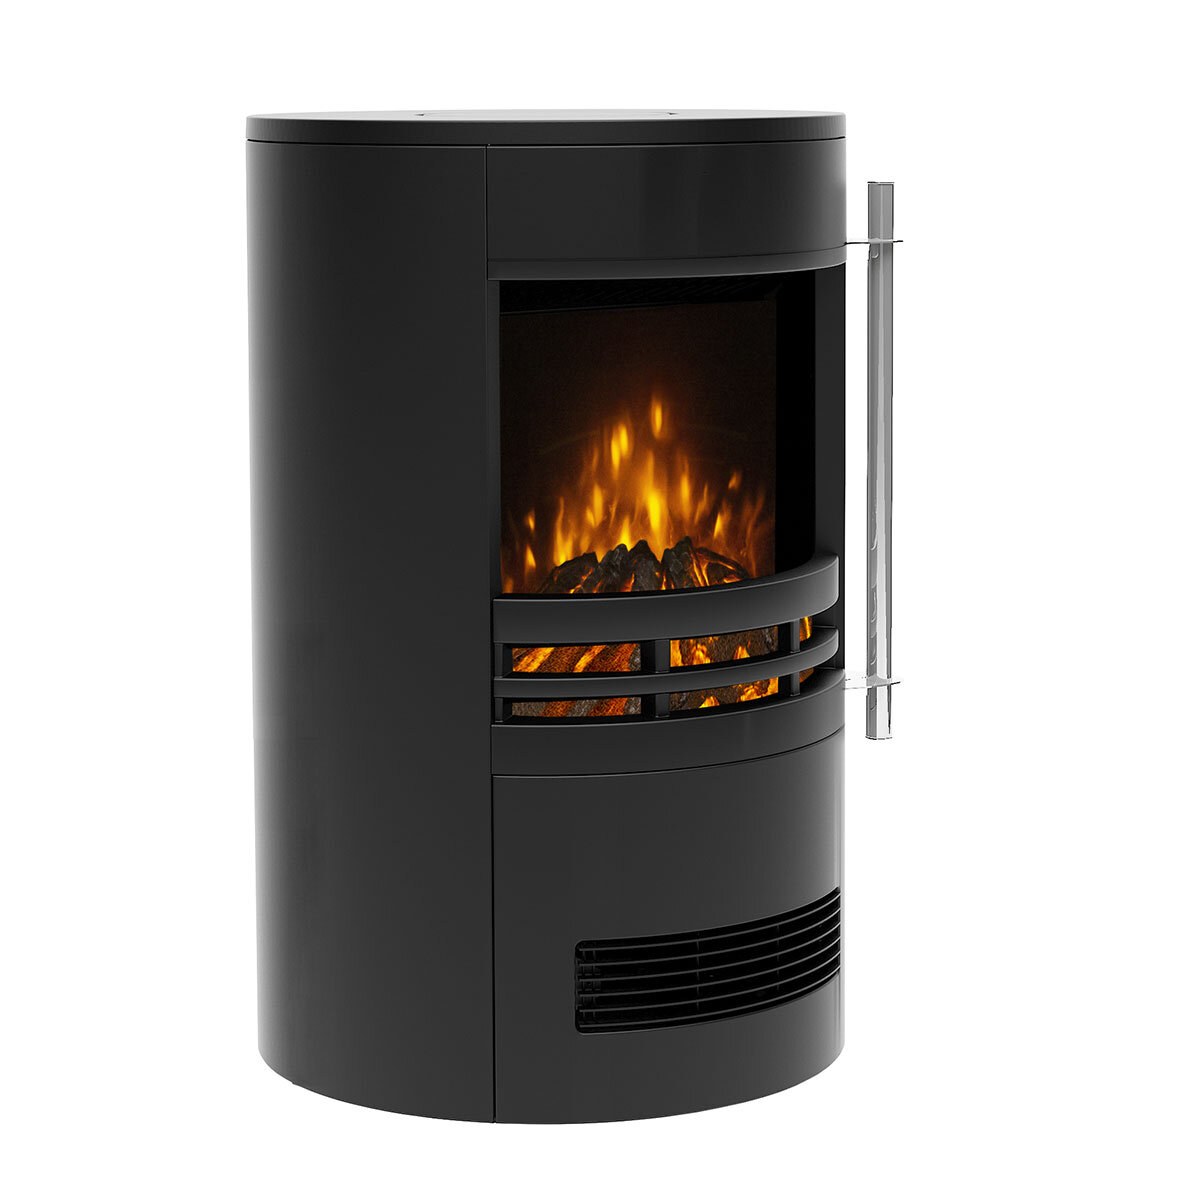 Flare Tunstall Cylinder Stove